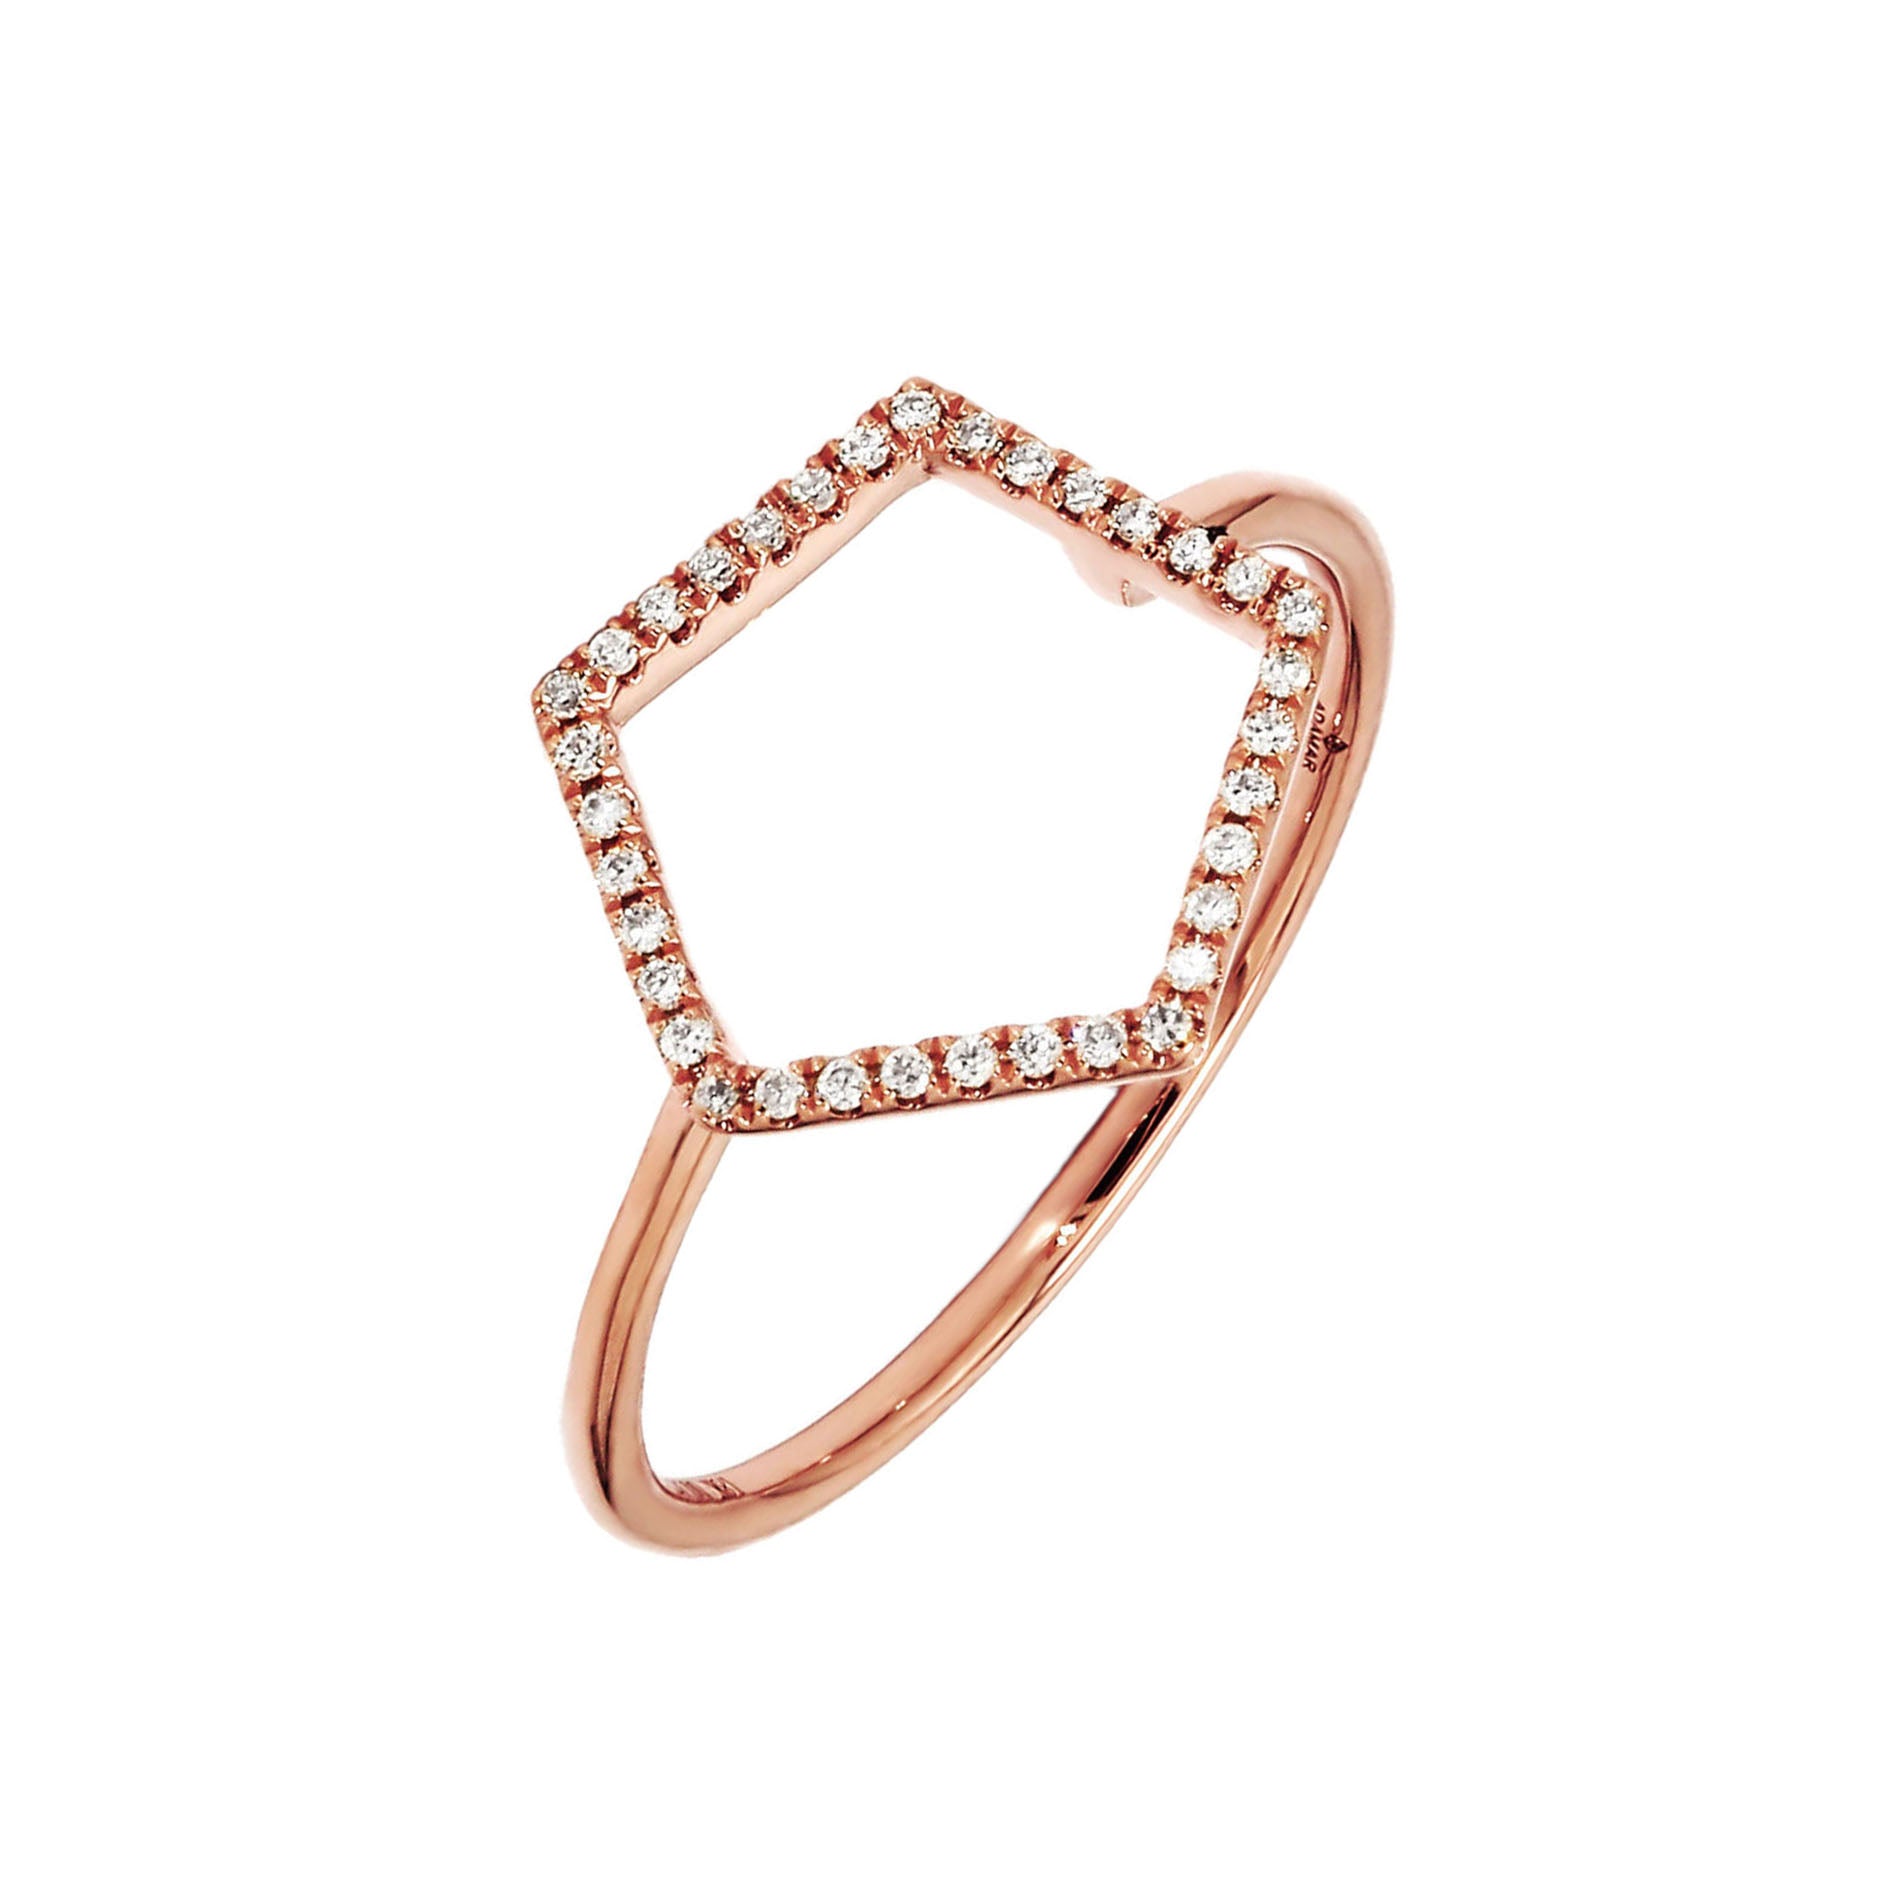 Adamar Jewels LUZ Cielo Ring in 18K rose gold set with diamonds